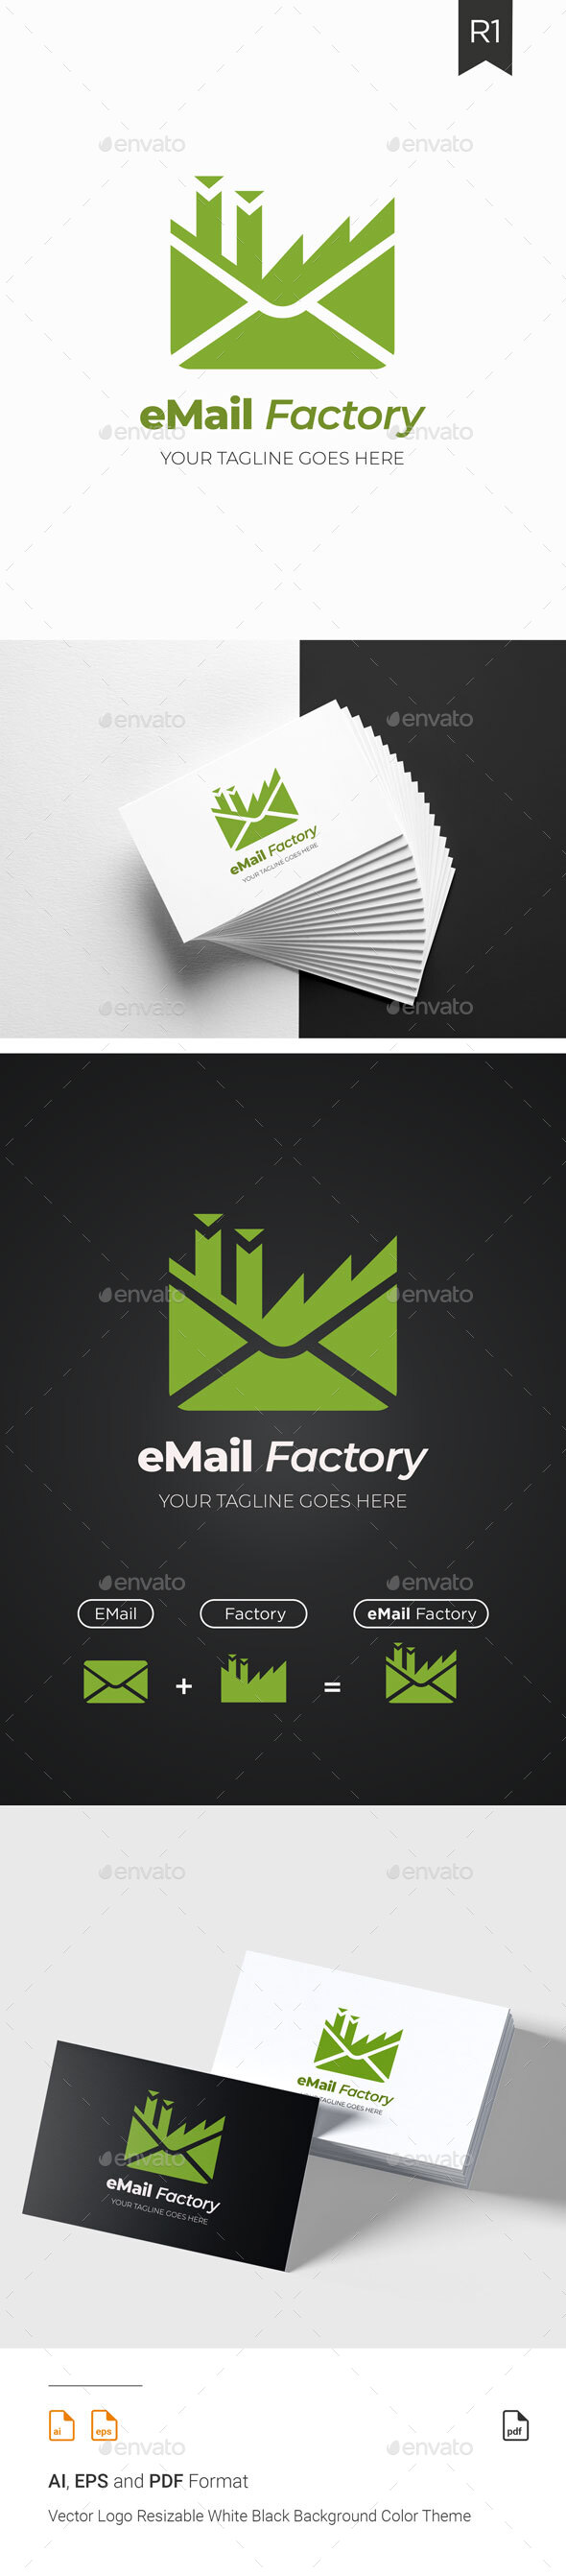 eMail Factory